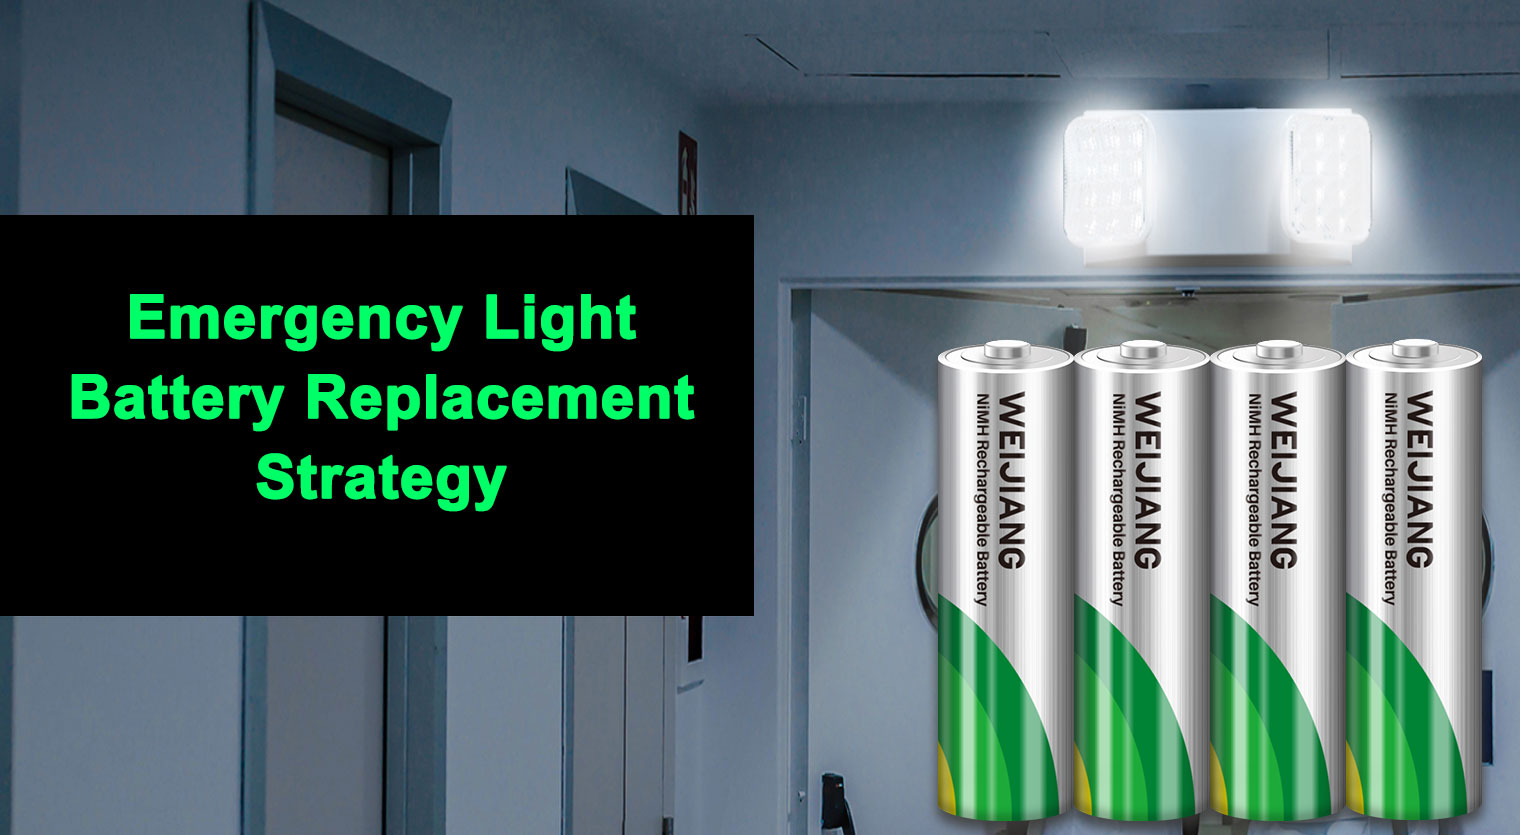 A Systematic Approach to Emergency Light Battery Replacement